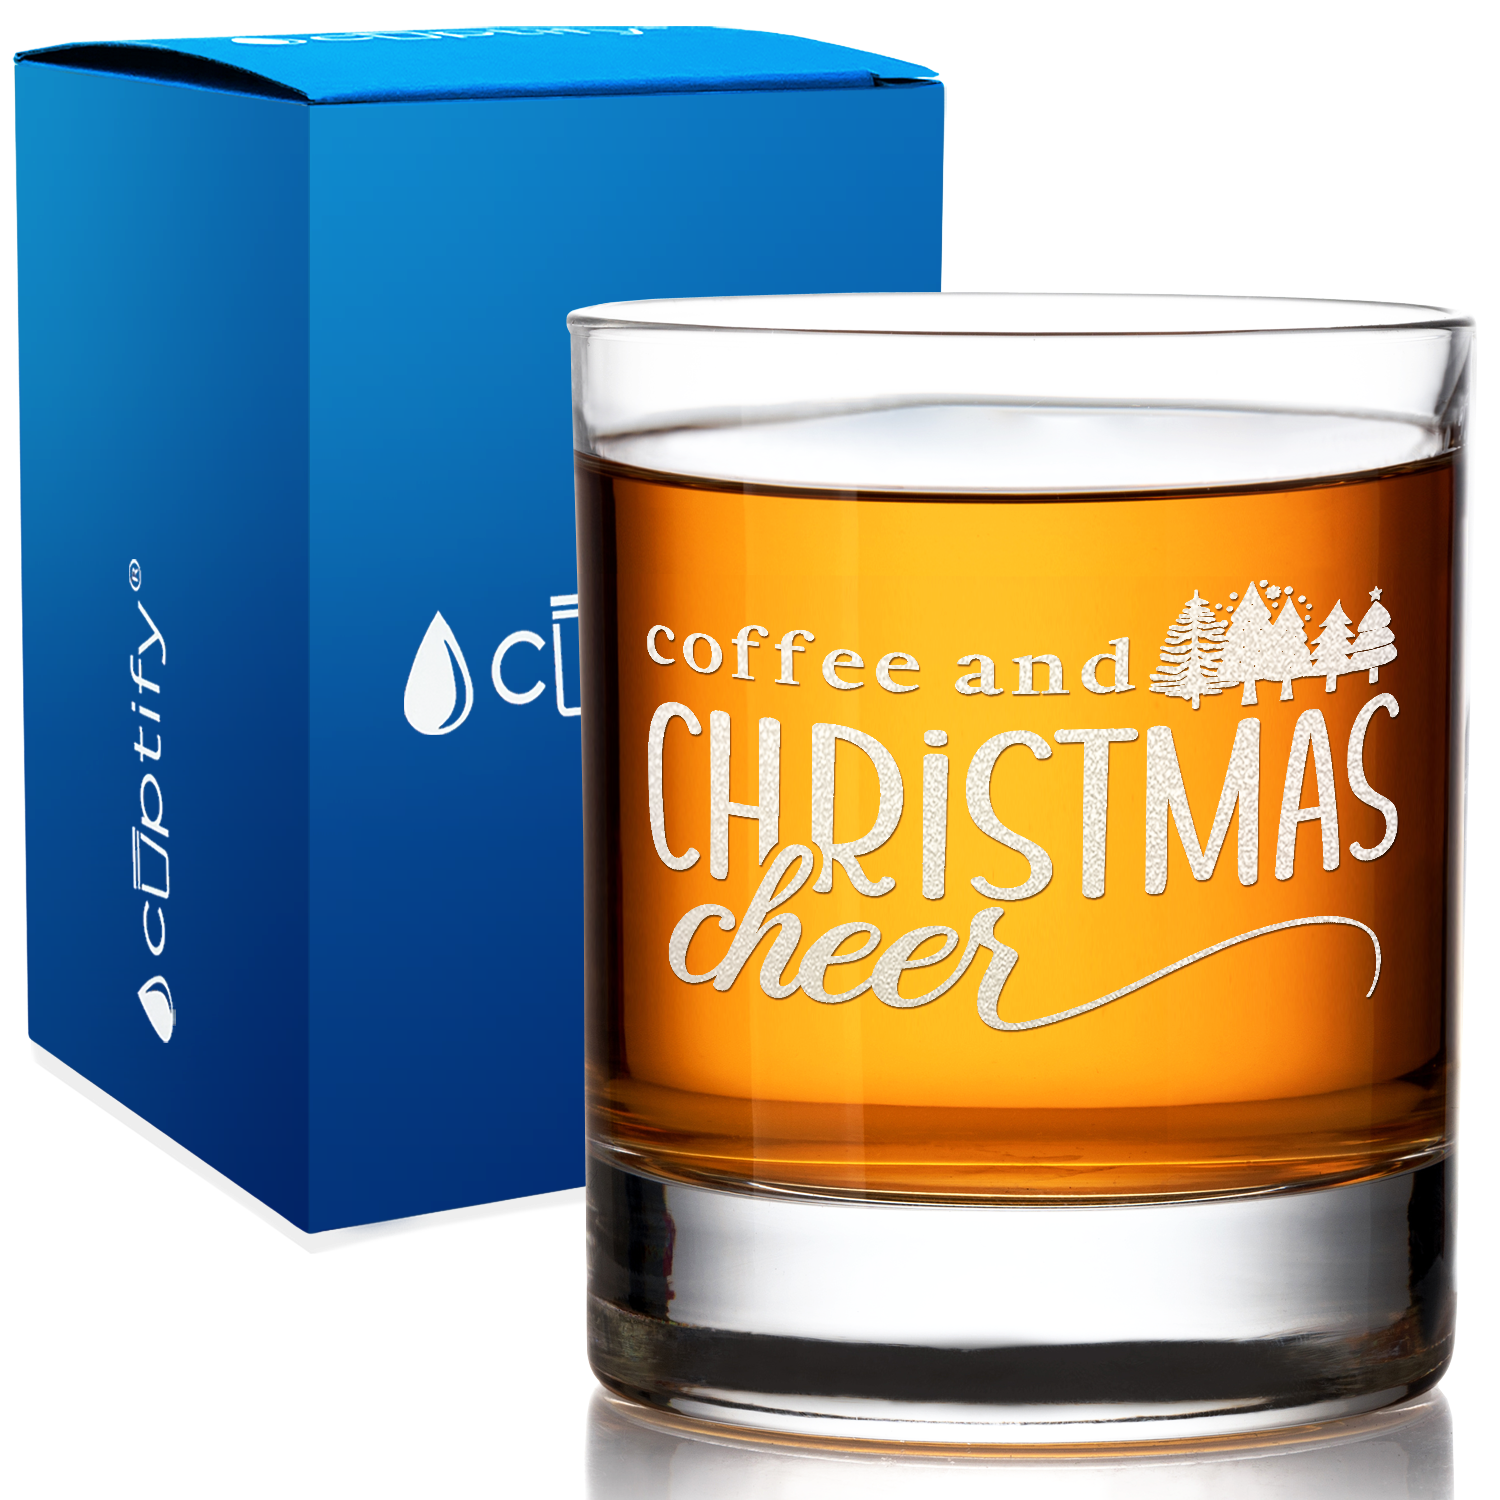 Coffee And Christmas Cheer on 10.25 oz Old Fashioned Glass